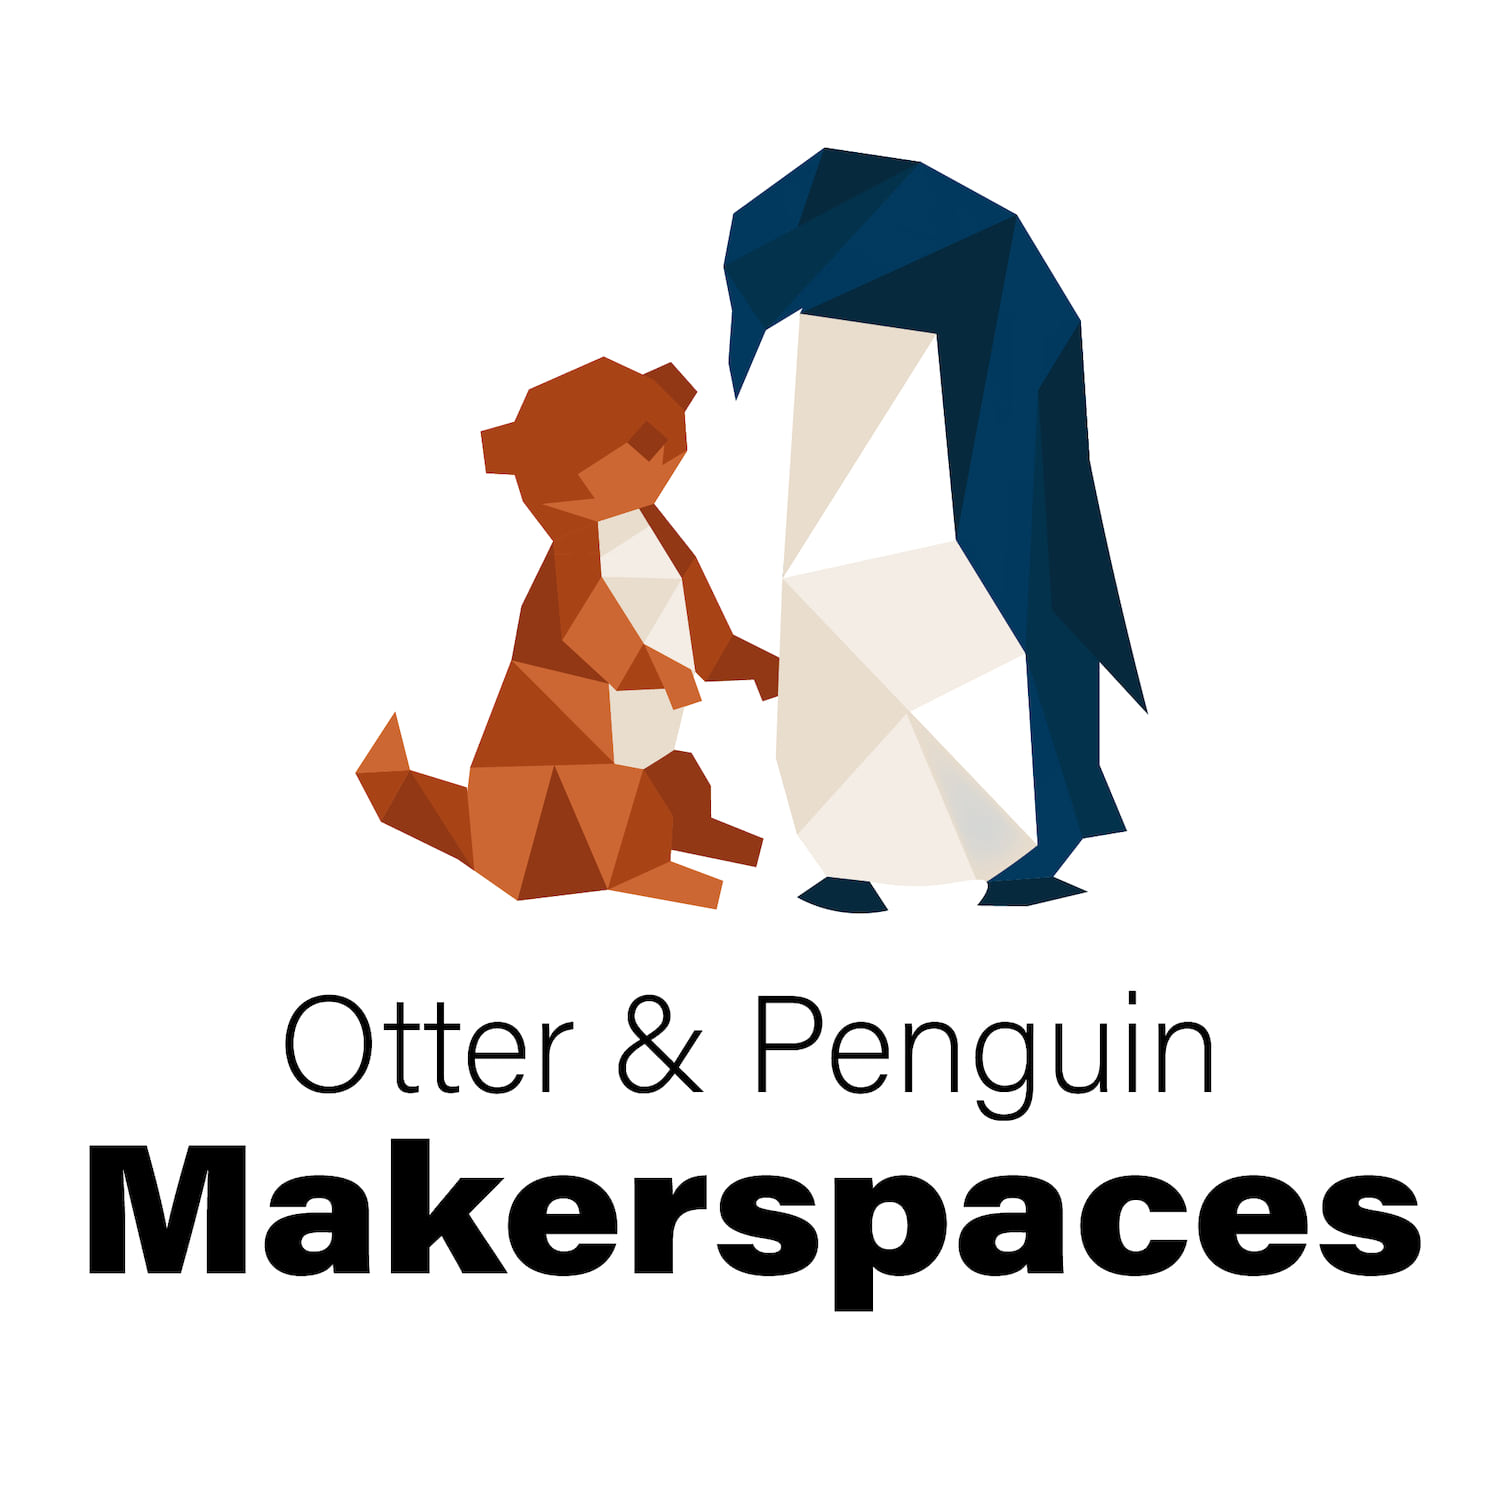 An otter and penguin posed above text logo for Otter & Penguin Makerspaces